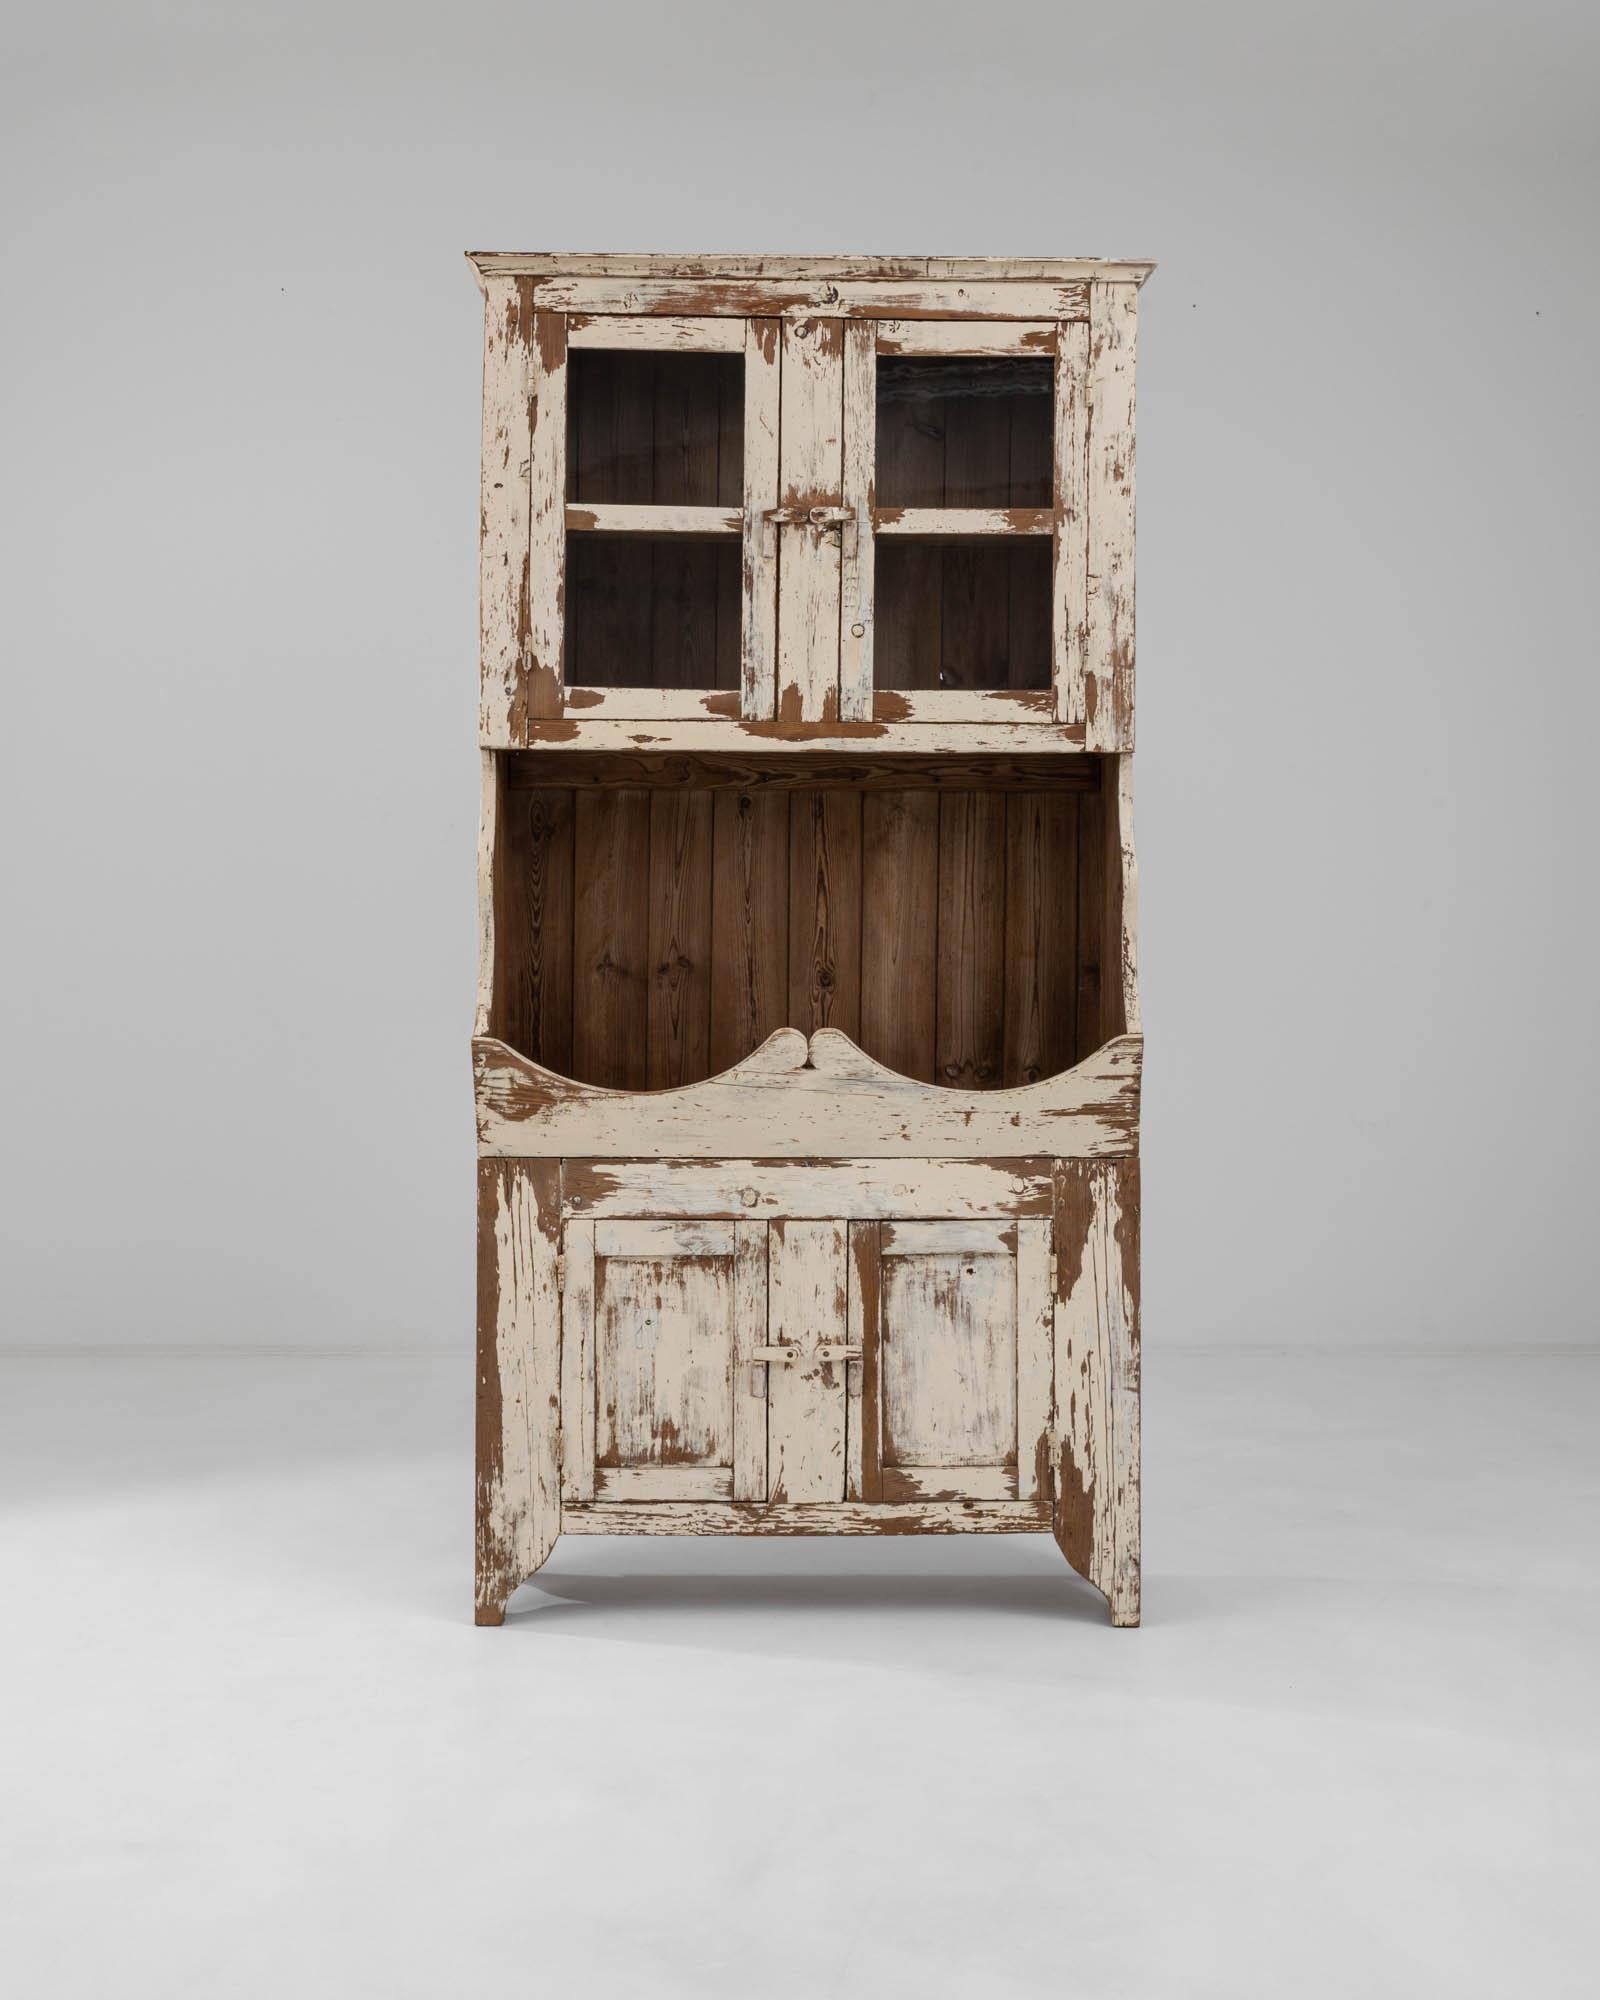 Exuding the warm playfulness of Southern Europe, this authentic vitrine was hand-crafted in 19th-century Portugal. The traditional buffet cupboard structure is reimagined by integrating the original display shelf in the center. The flowing outlines